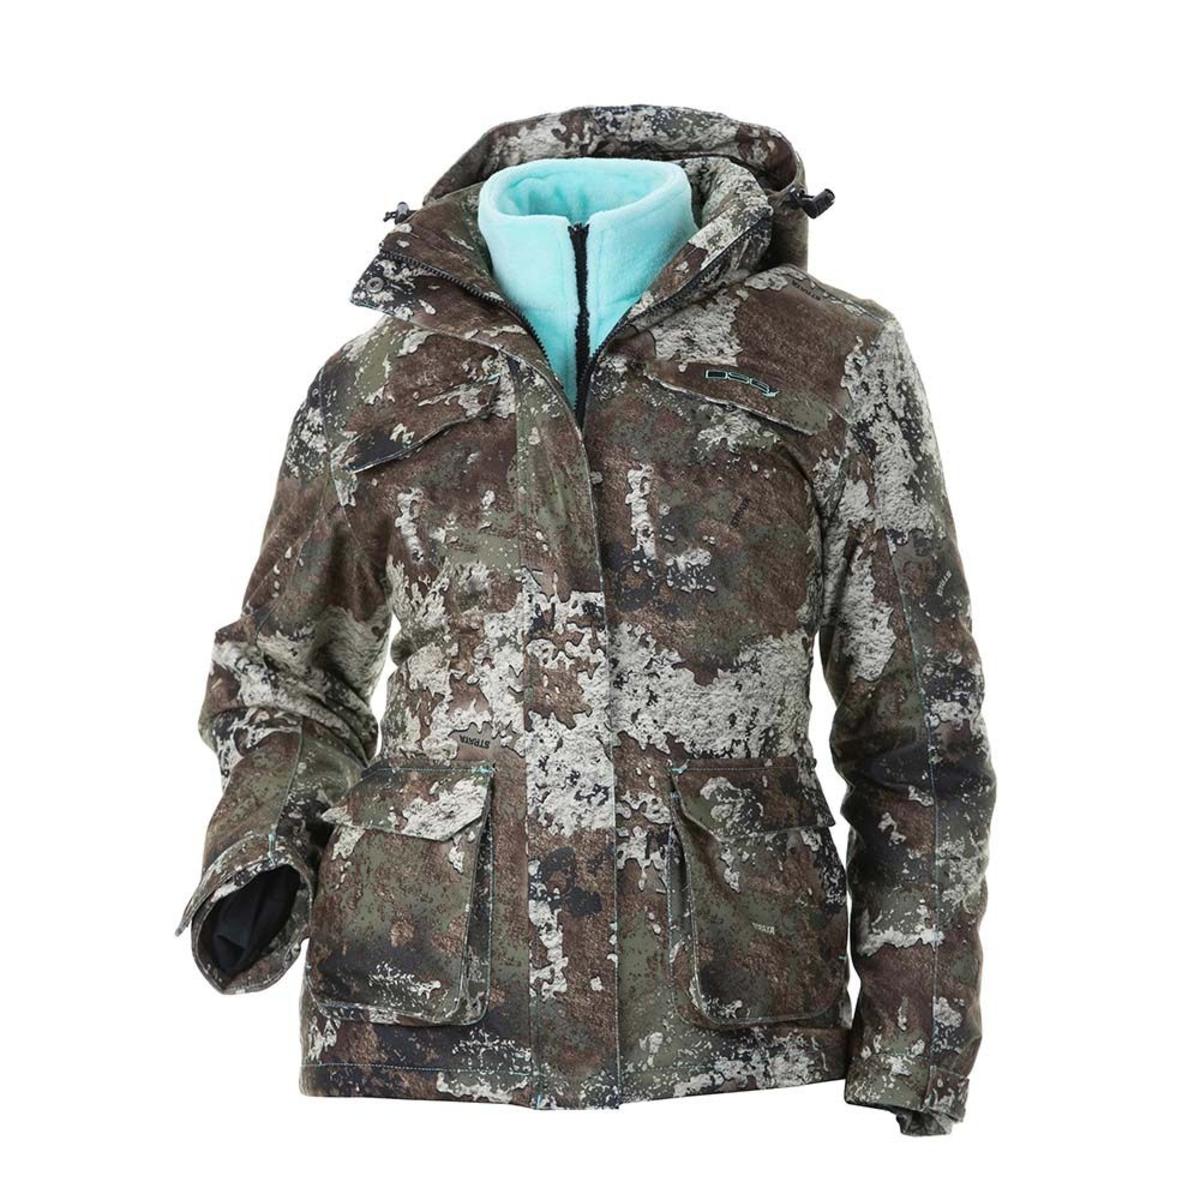 DSG Kylie 3.0 3-in-1 Hunting Jacket with Removable Fleece Liner - True Timber Strata